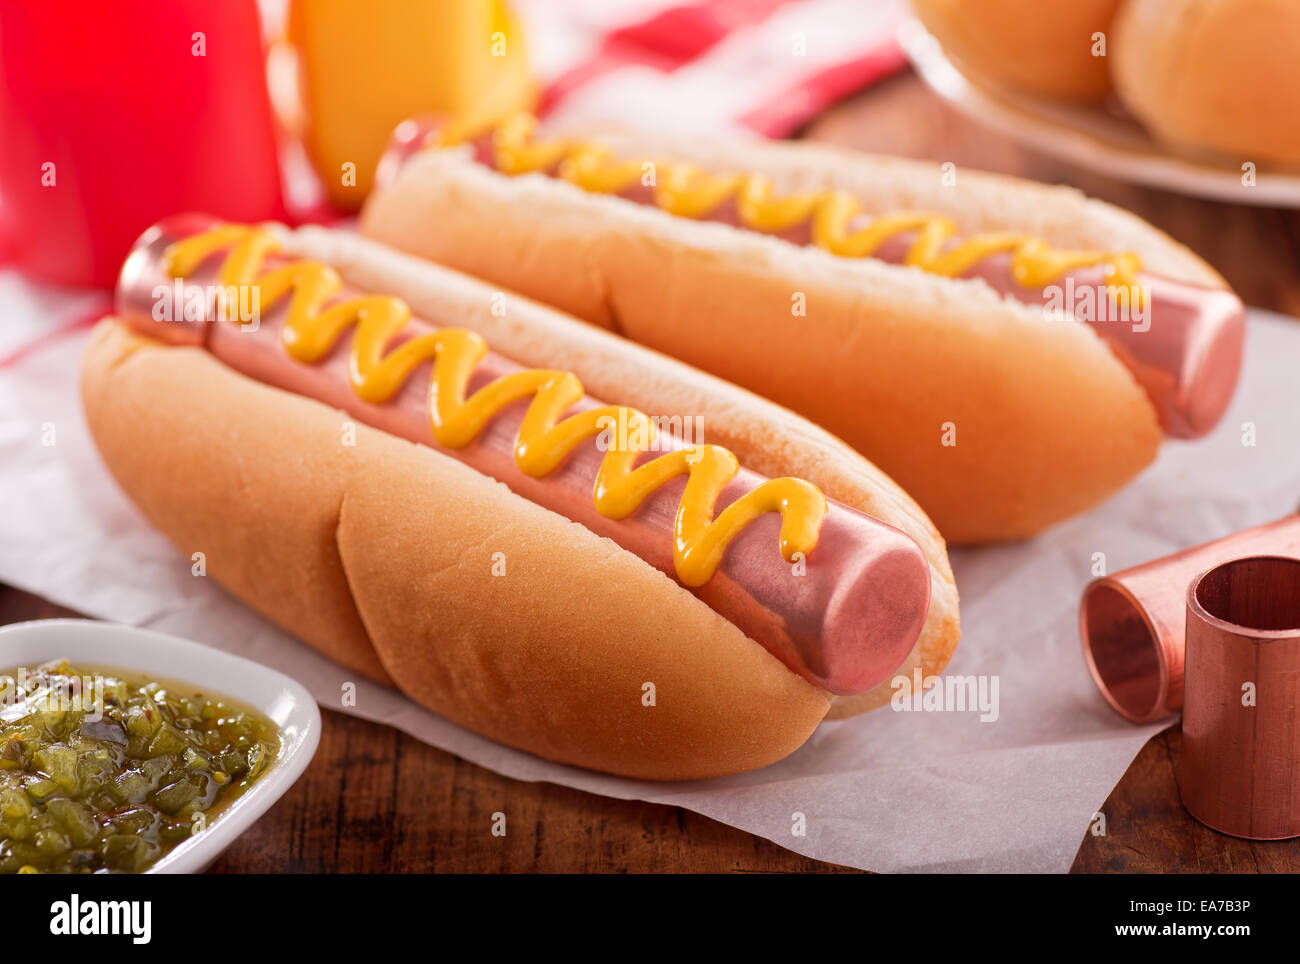 Food humour concept with hot dogs made with copper pipe. Stock Photo